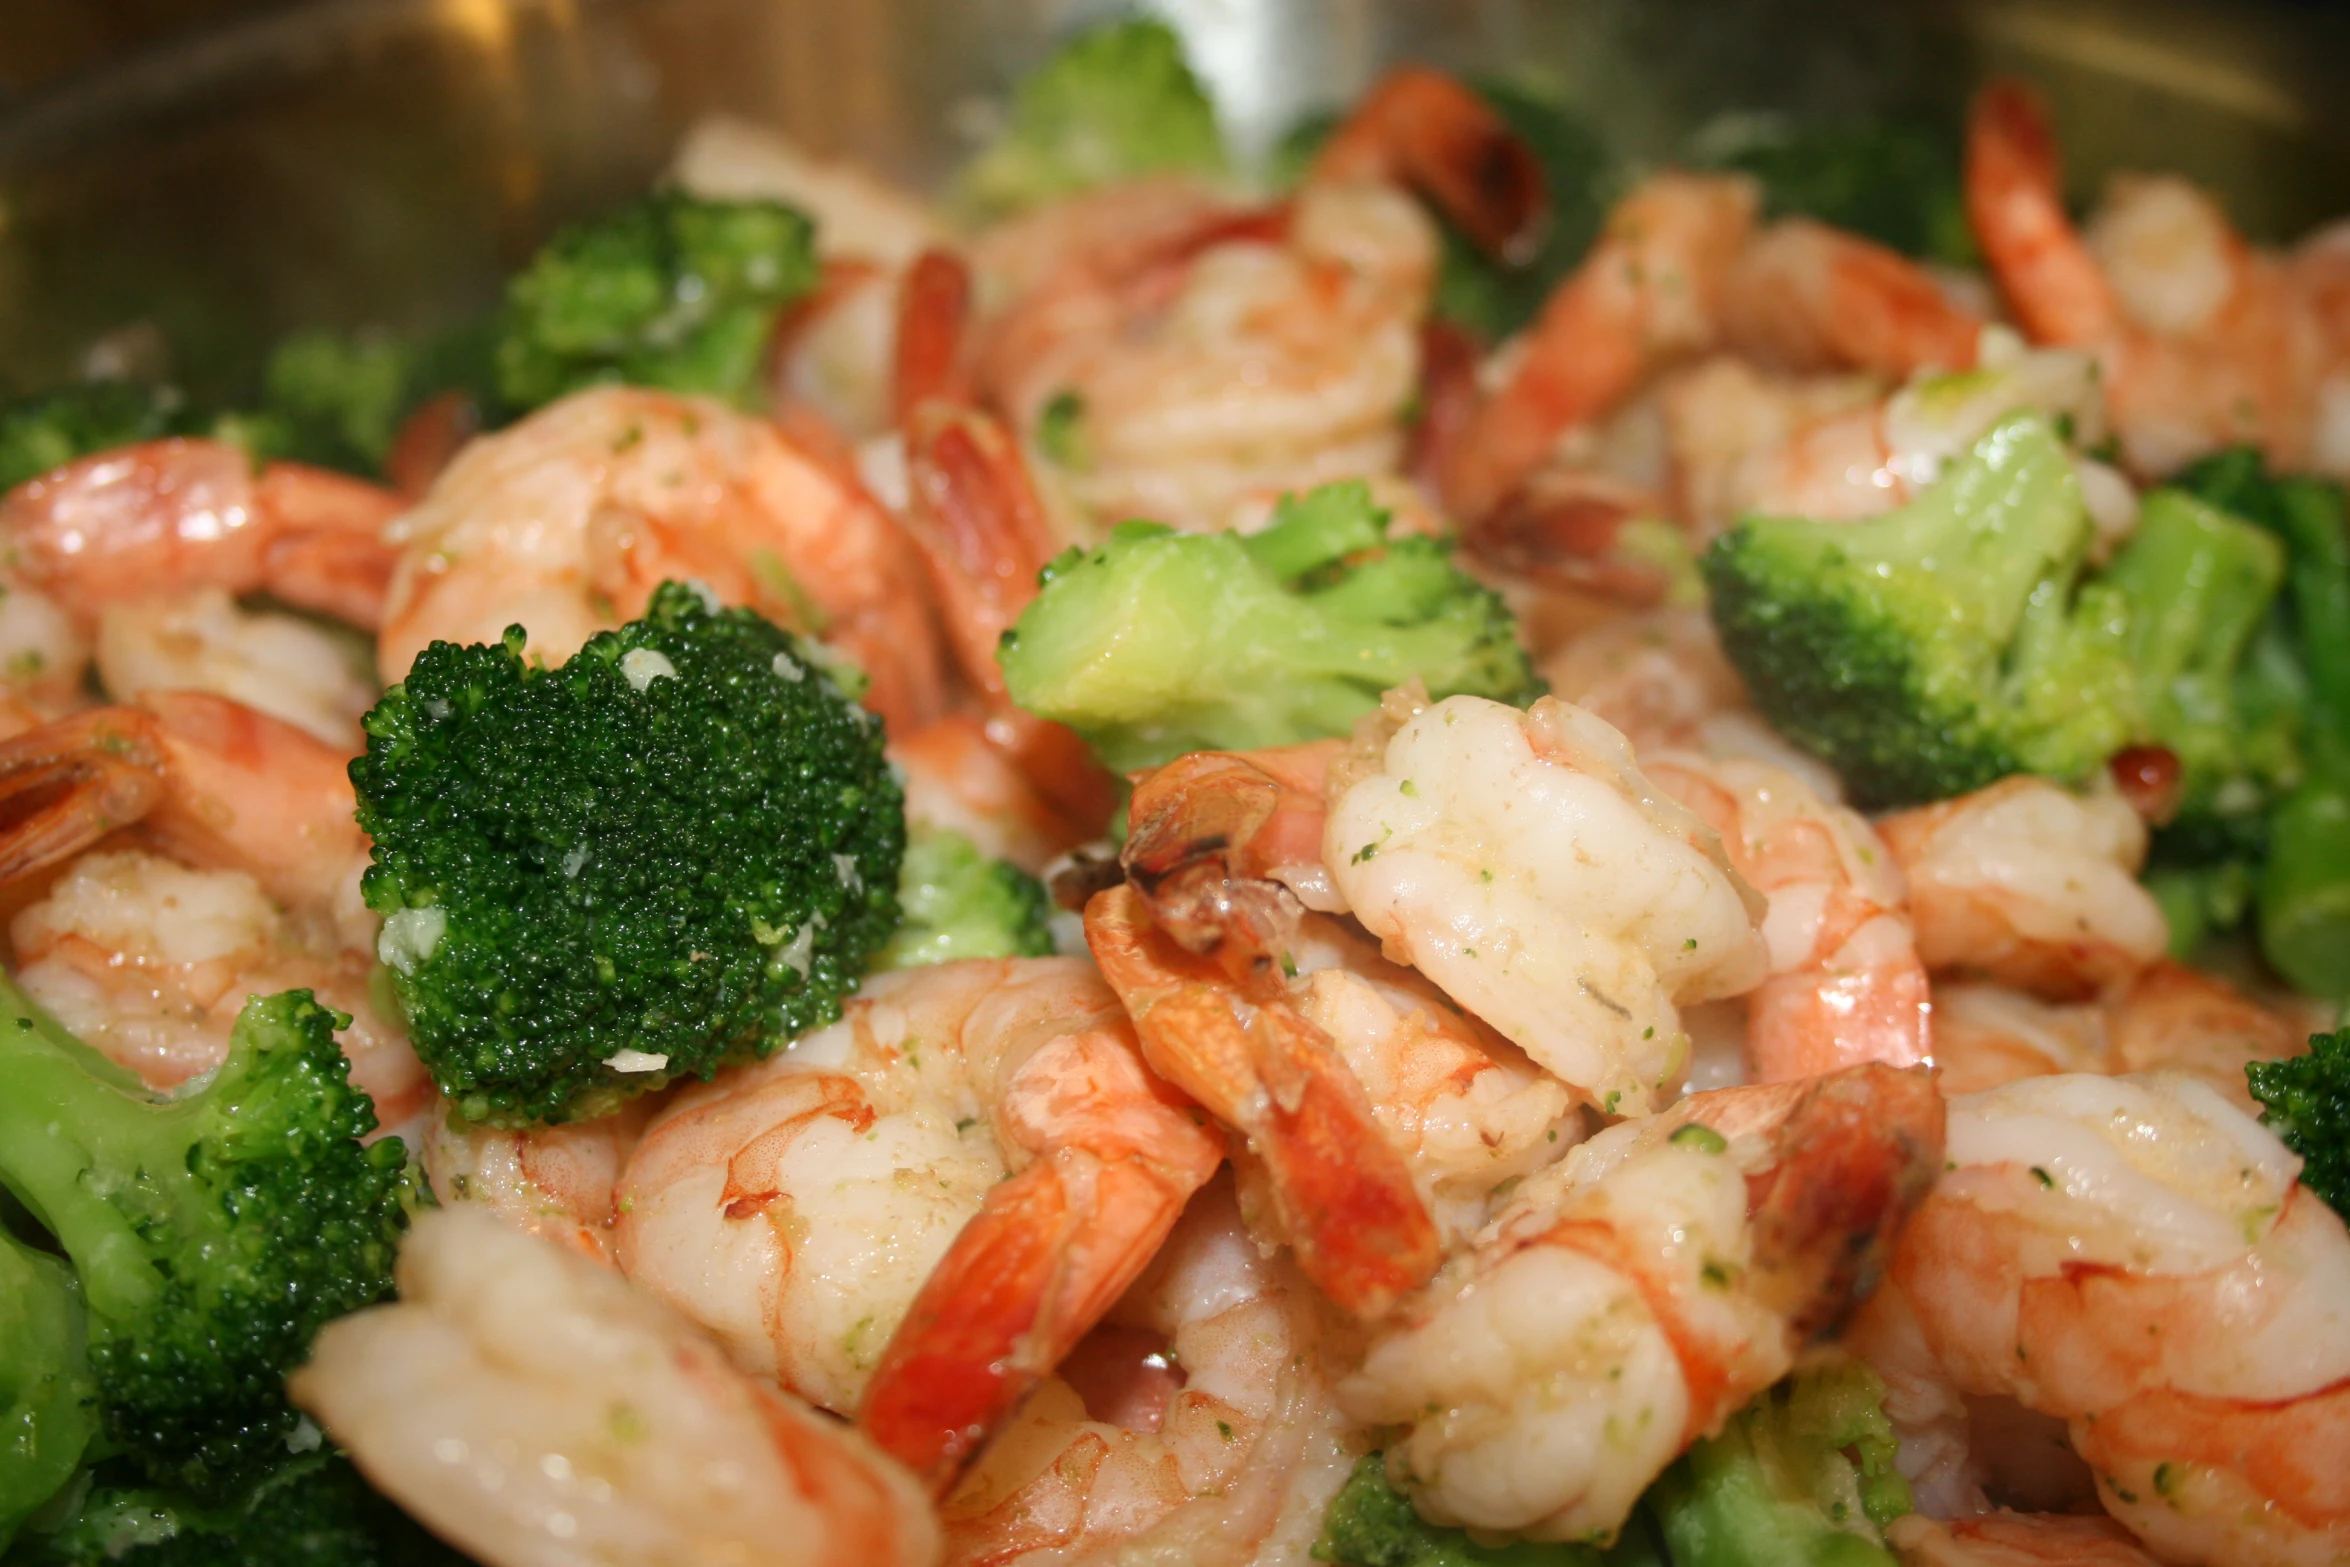 some shrimp and broccoli are fried together